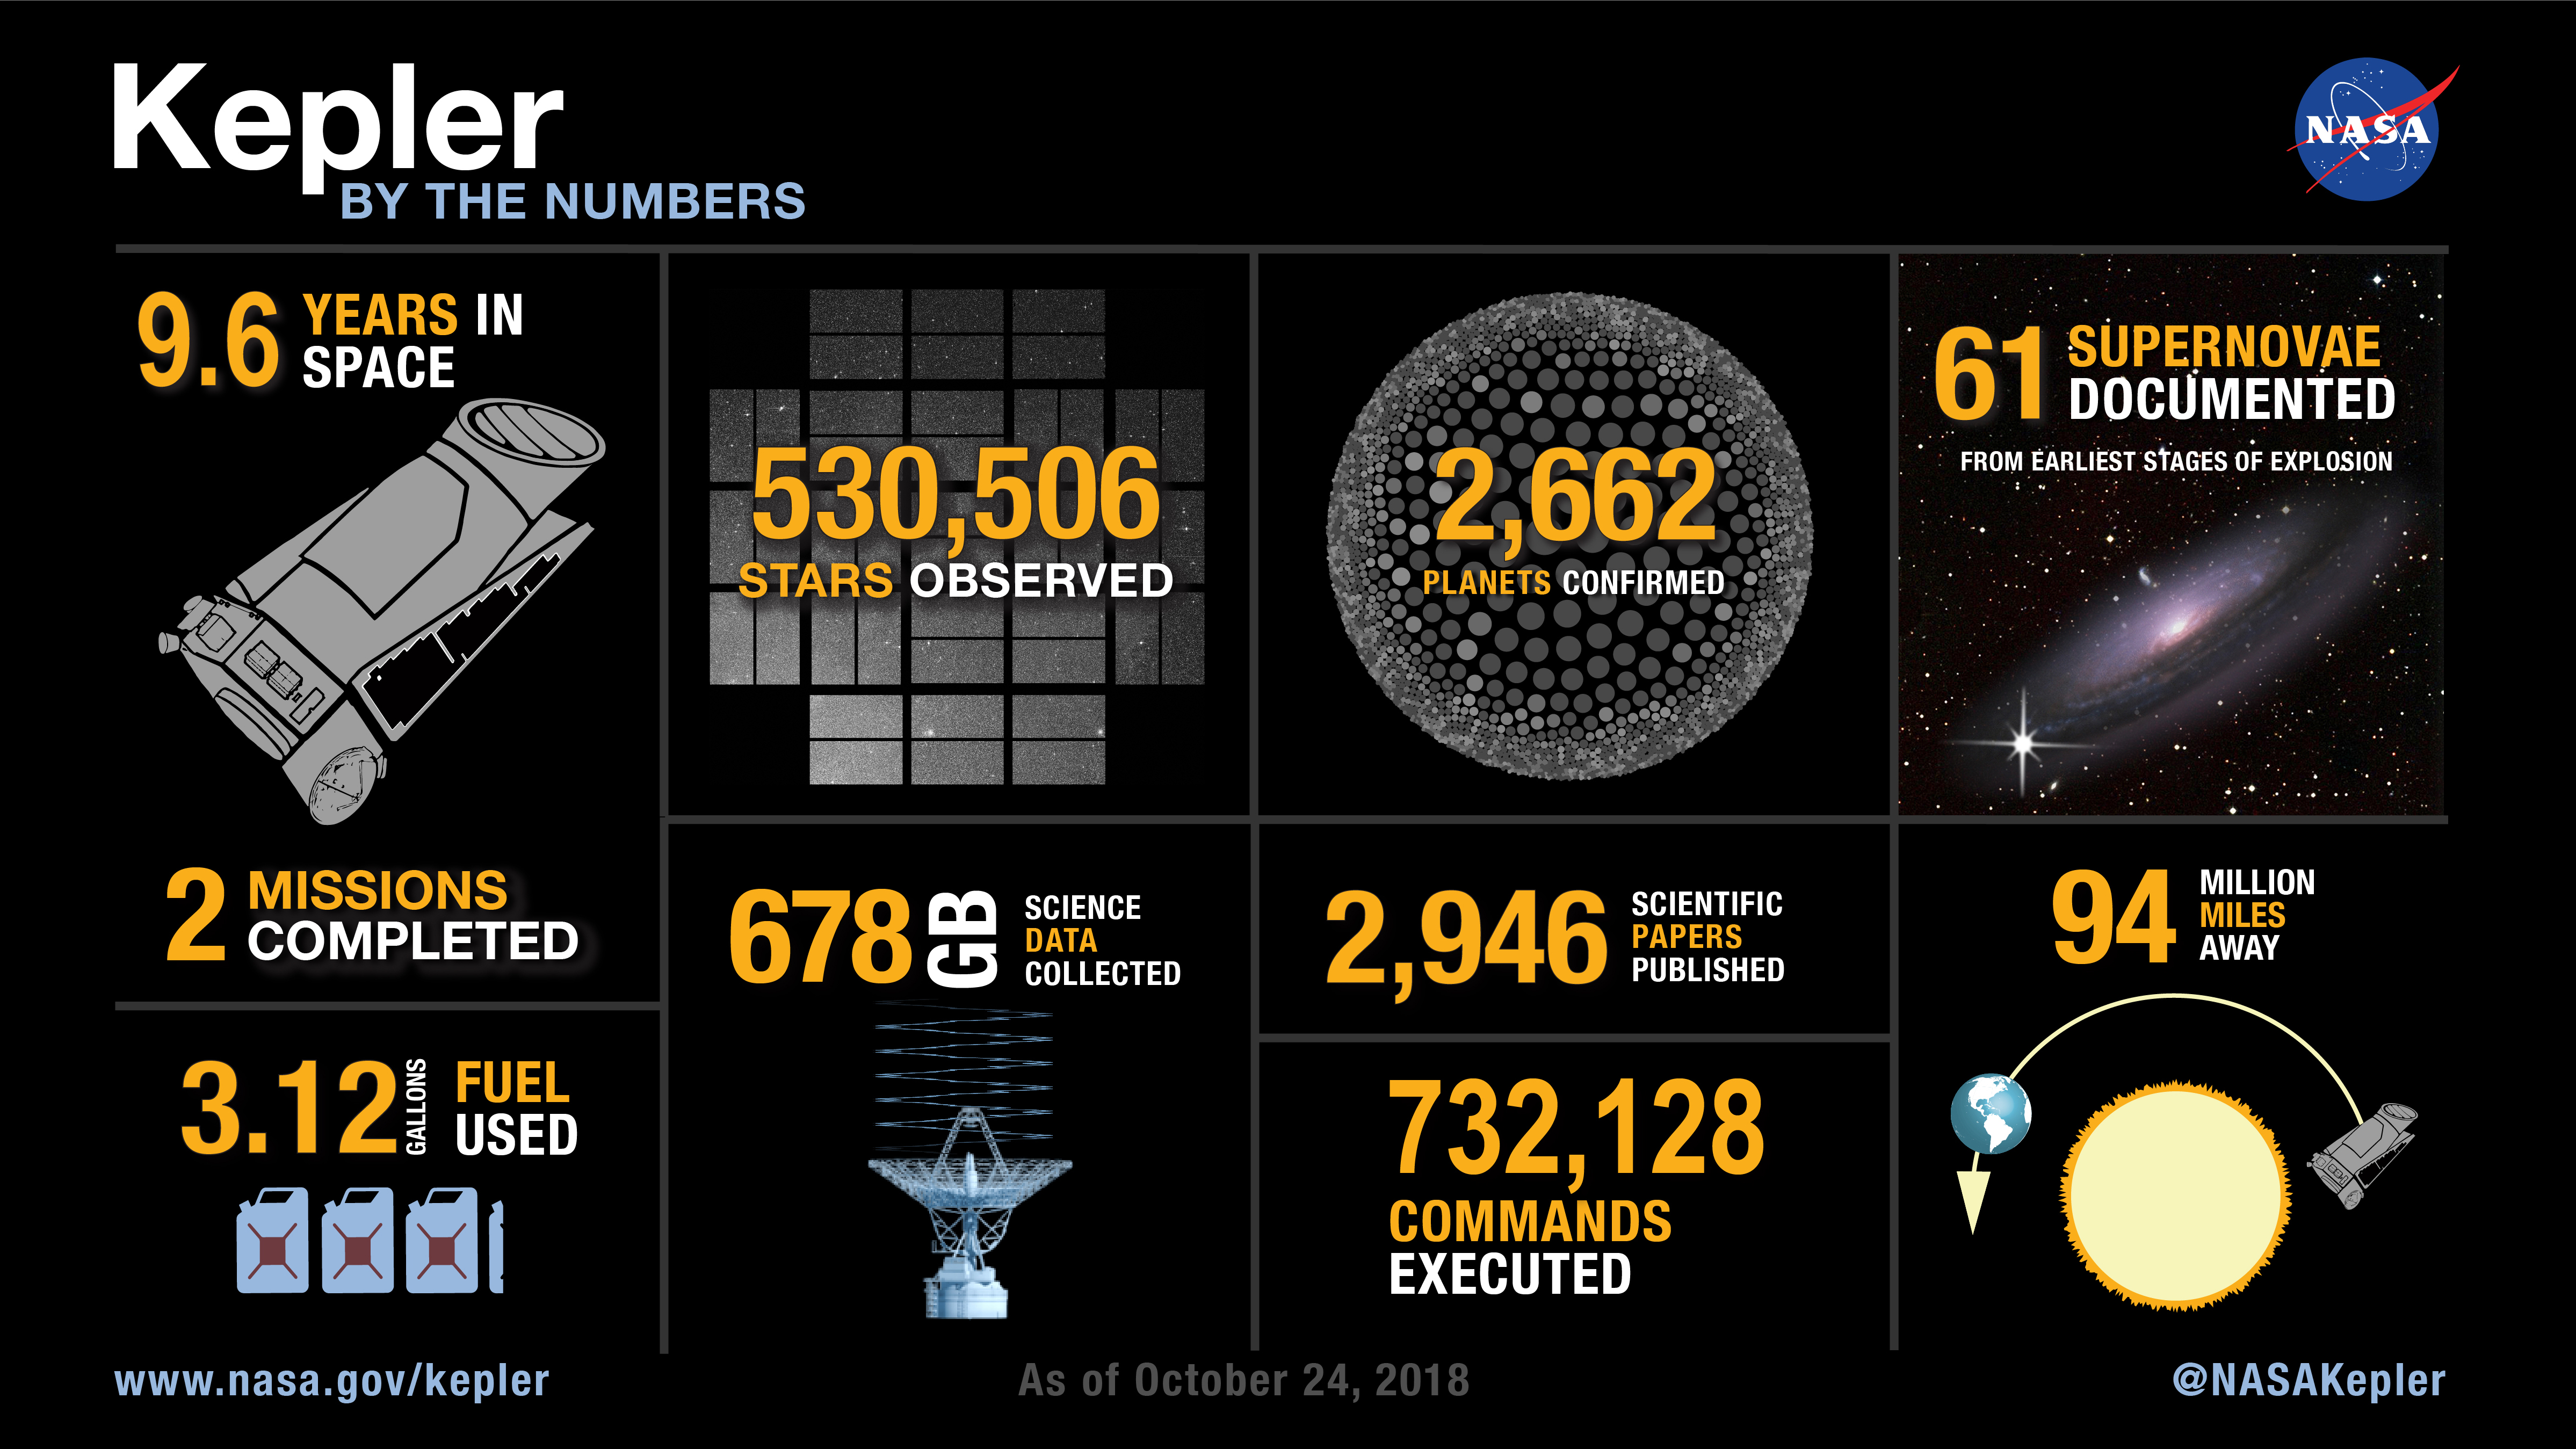 https:/exoplanets.nasa.gov/resources/2192/nasas-kepler-mission-by-the-numbers; 